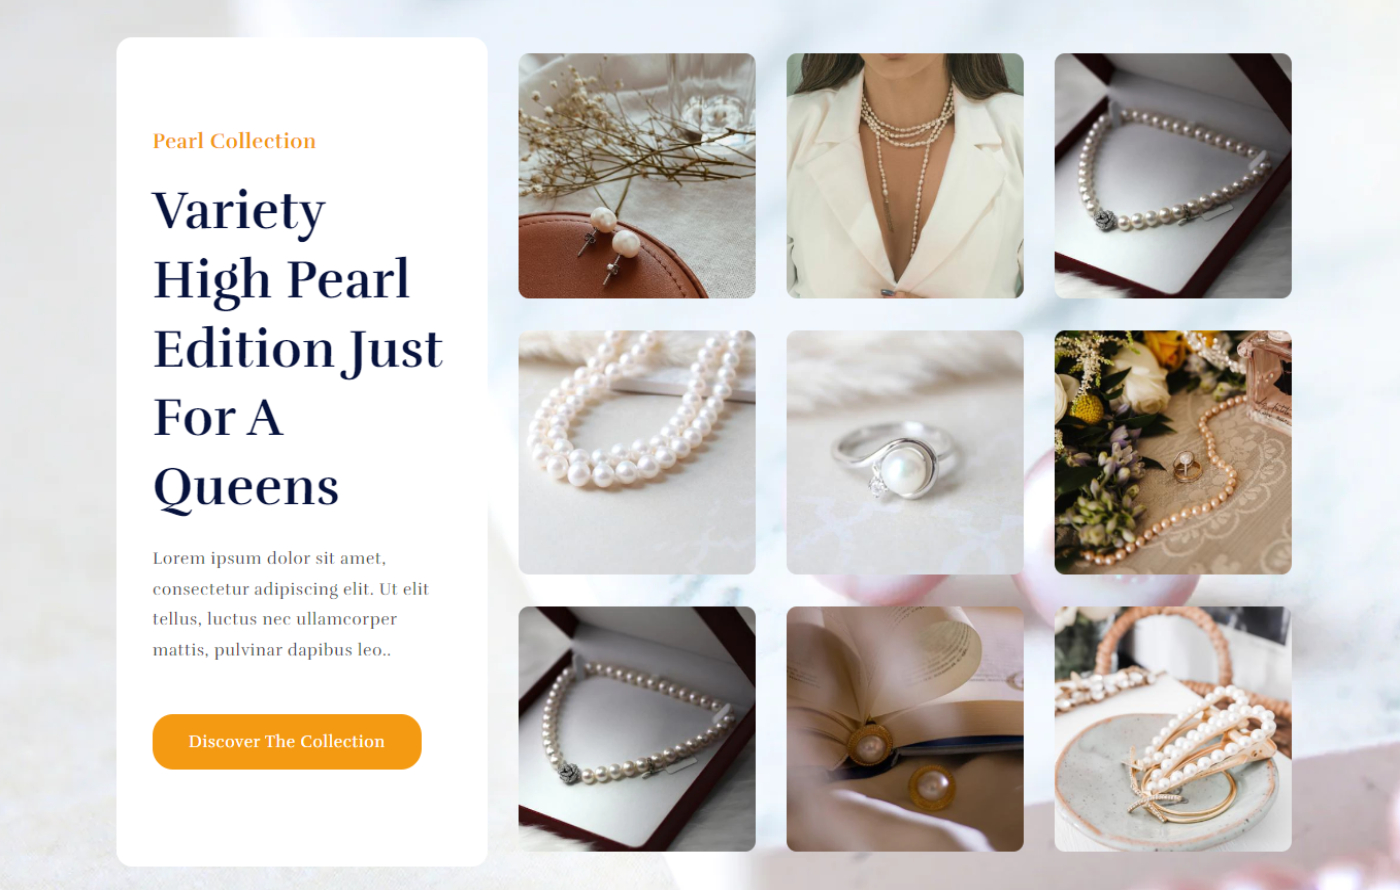 Pearify - Pearl Shopify template built by Pagefly